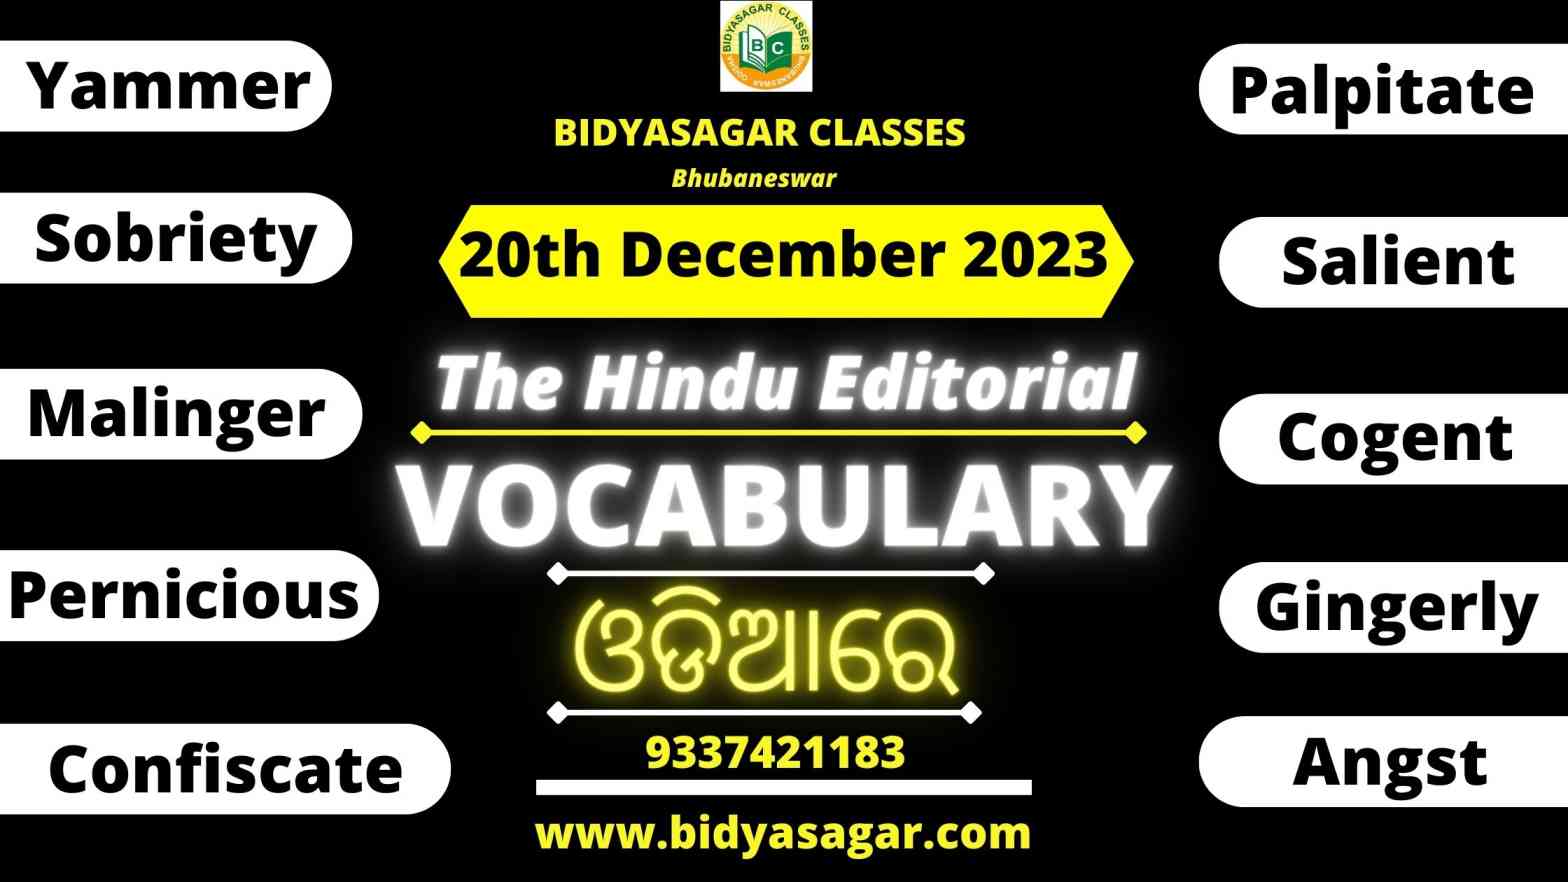 The Hindu Editorial Vocabulary of 20th December 2023